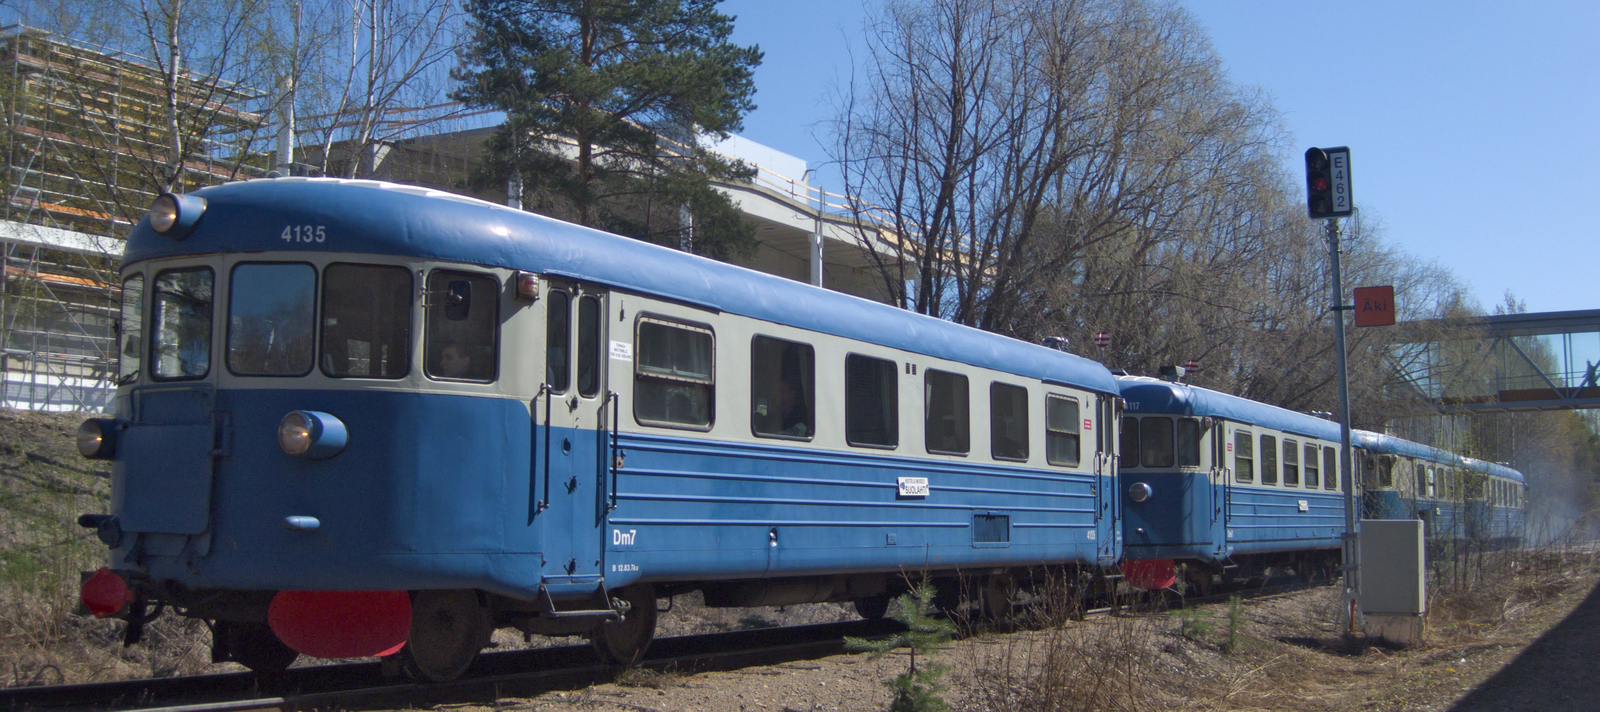 Museum train with four Dm7s in Äänekoski in May 2011